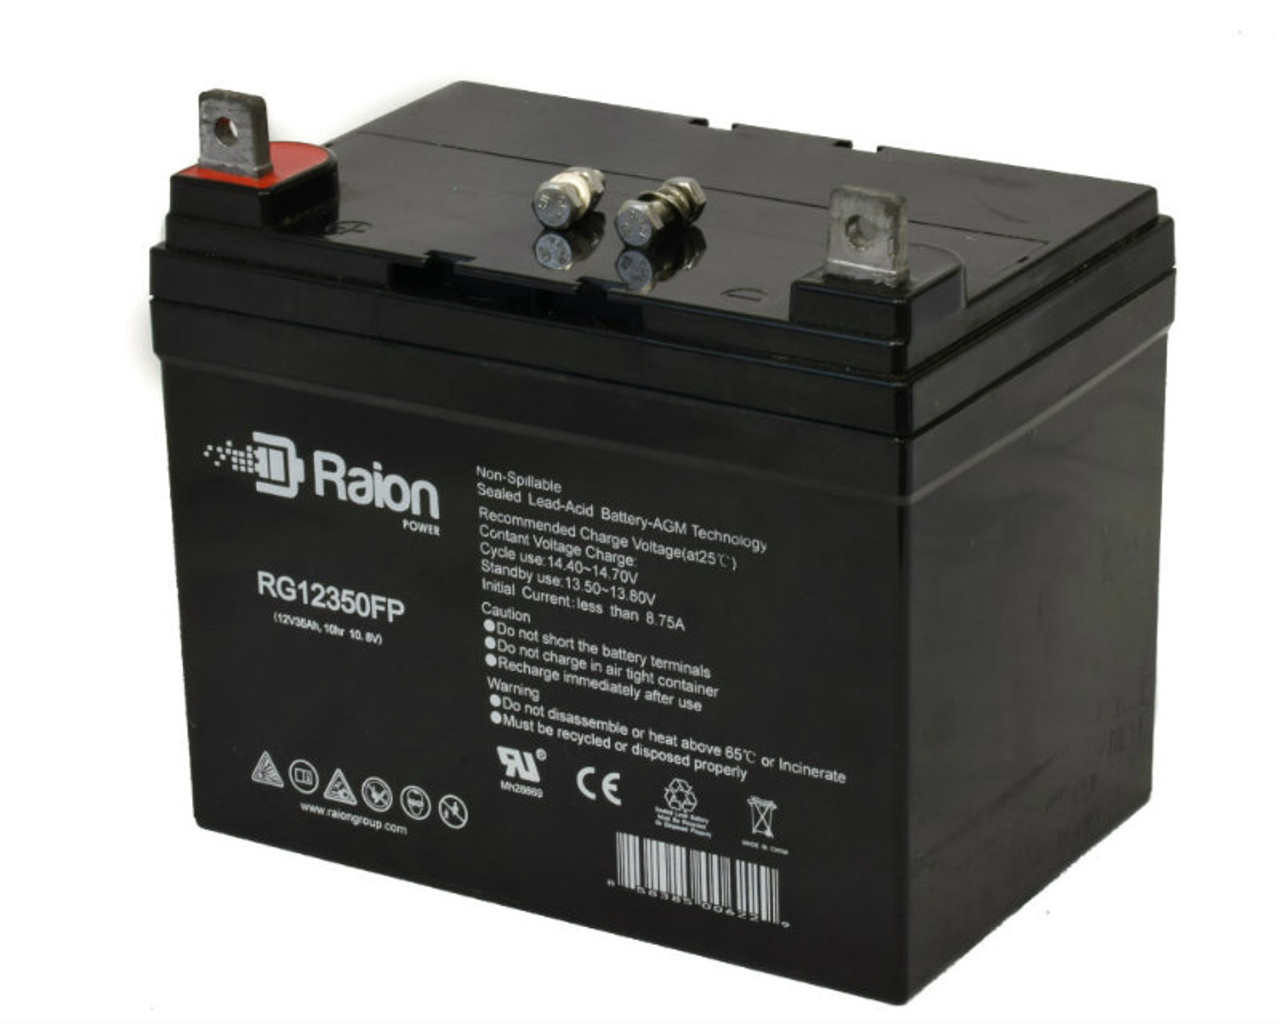 Raion Power Replacement 12V 35Ah RG12350FP Mobility Scooter Battery for Electric Mobility Rascal Scooter